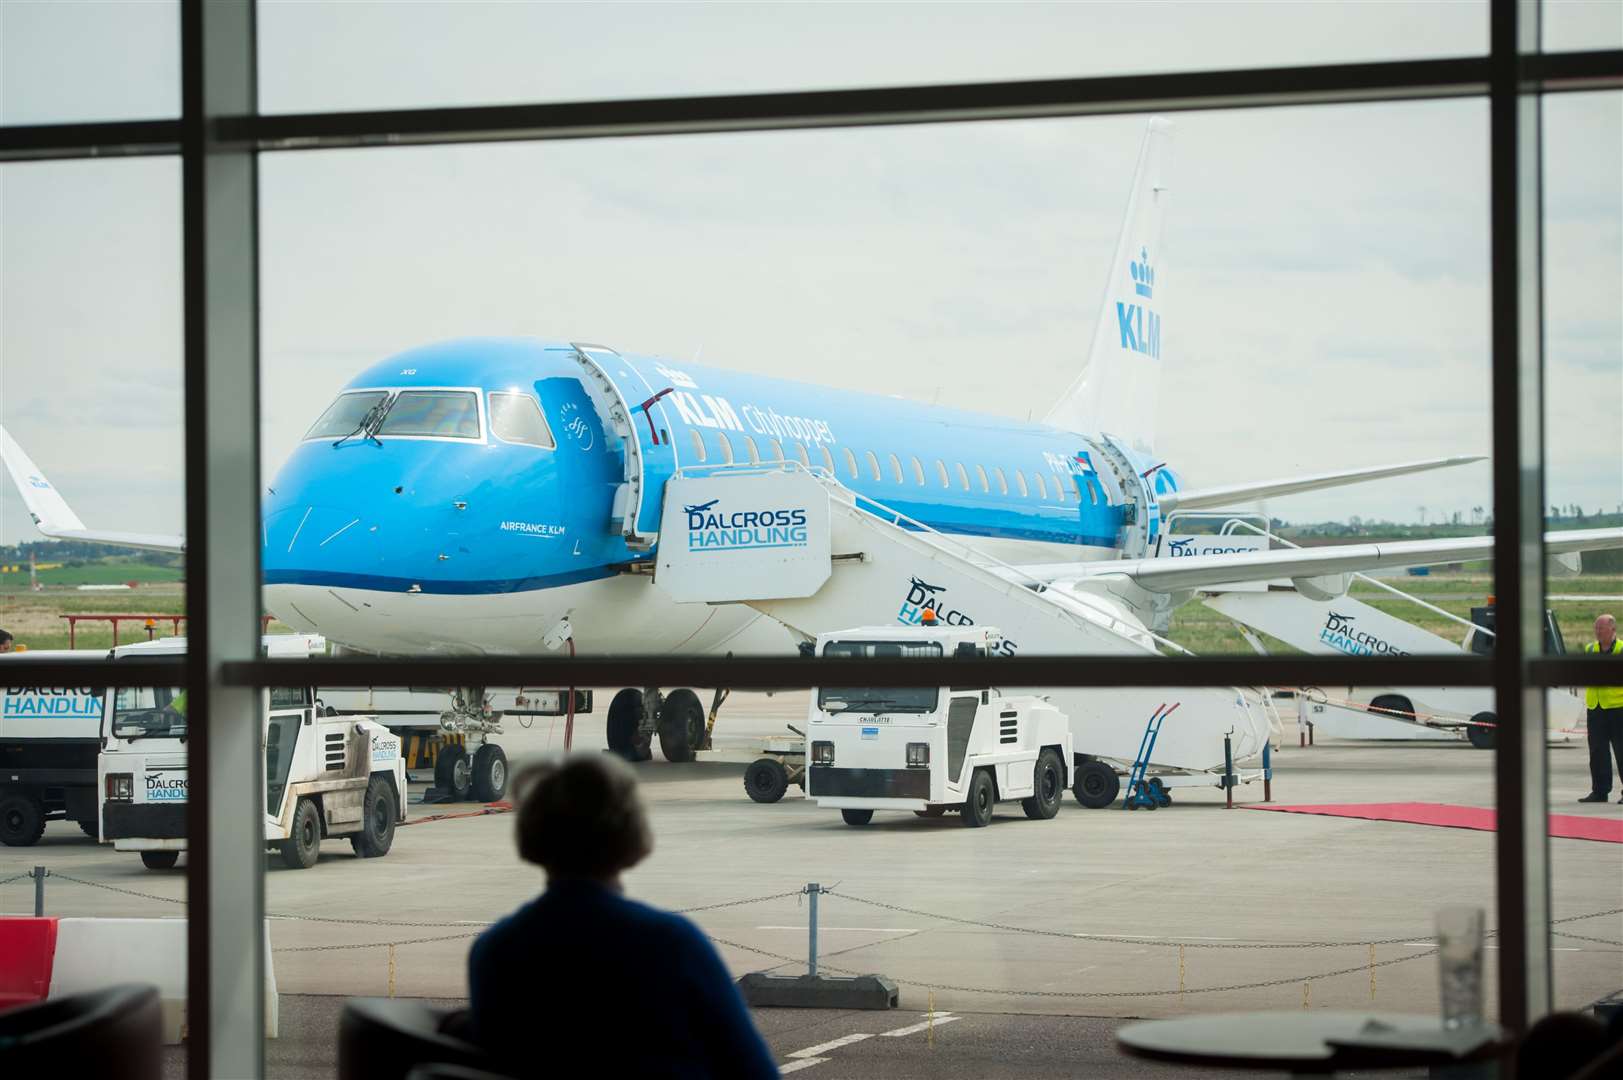 KLM flights to and from Inverness were cancelled on Friday.